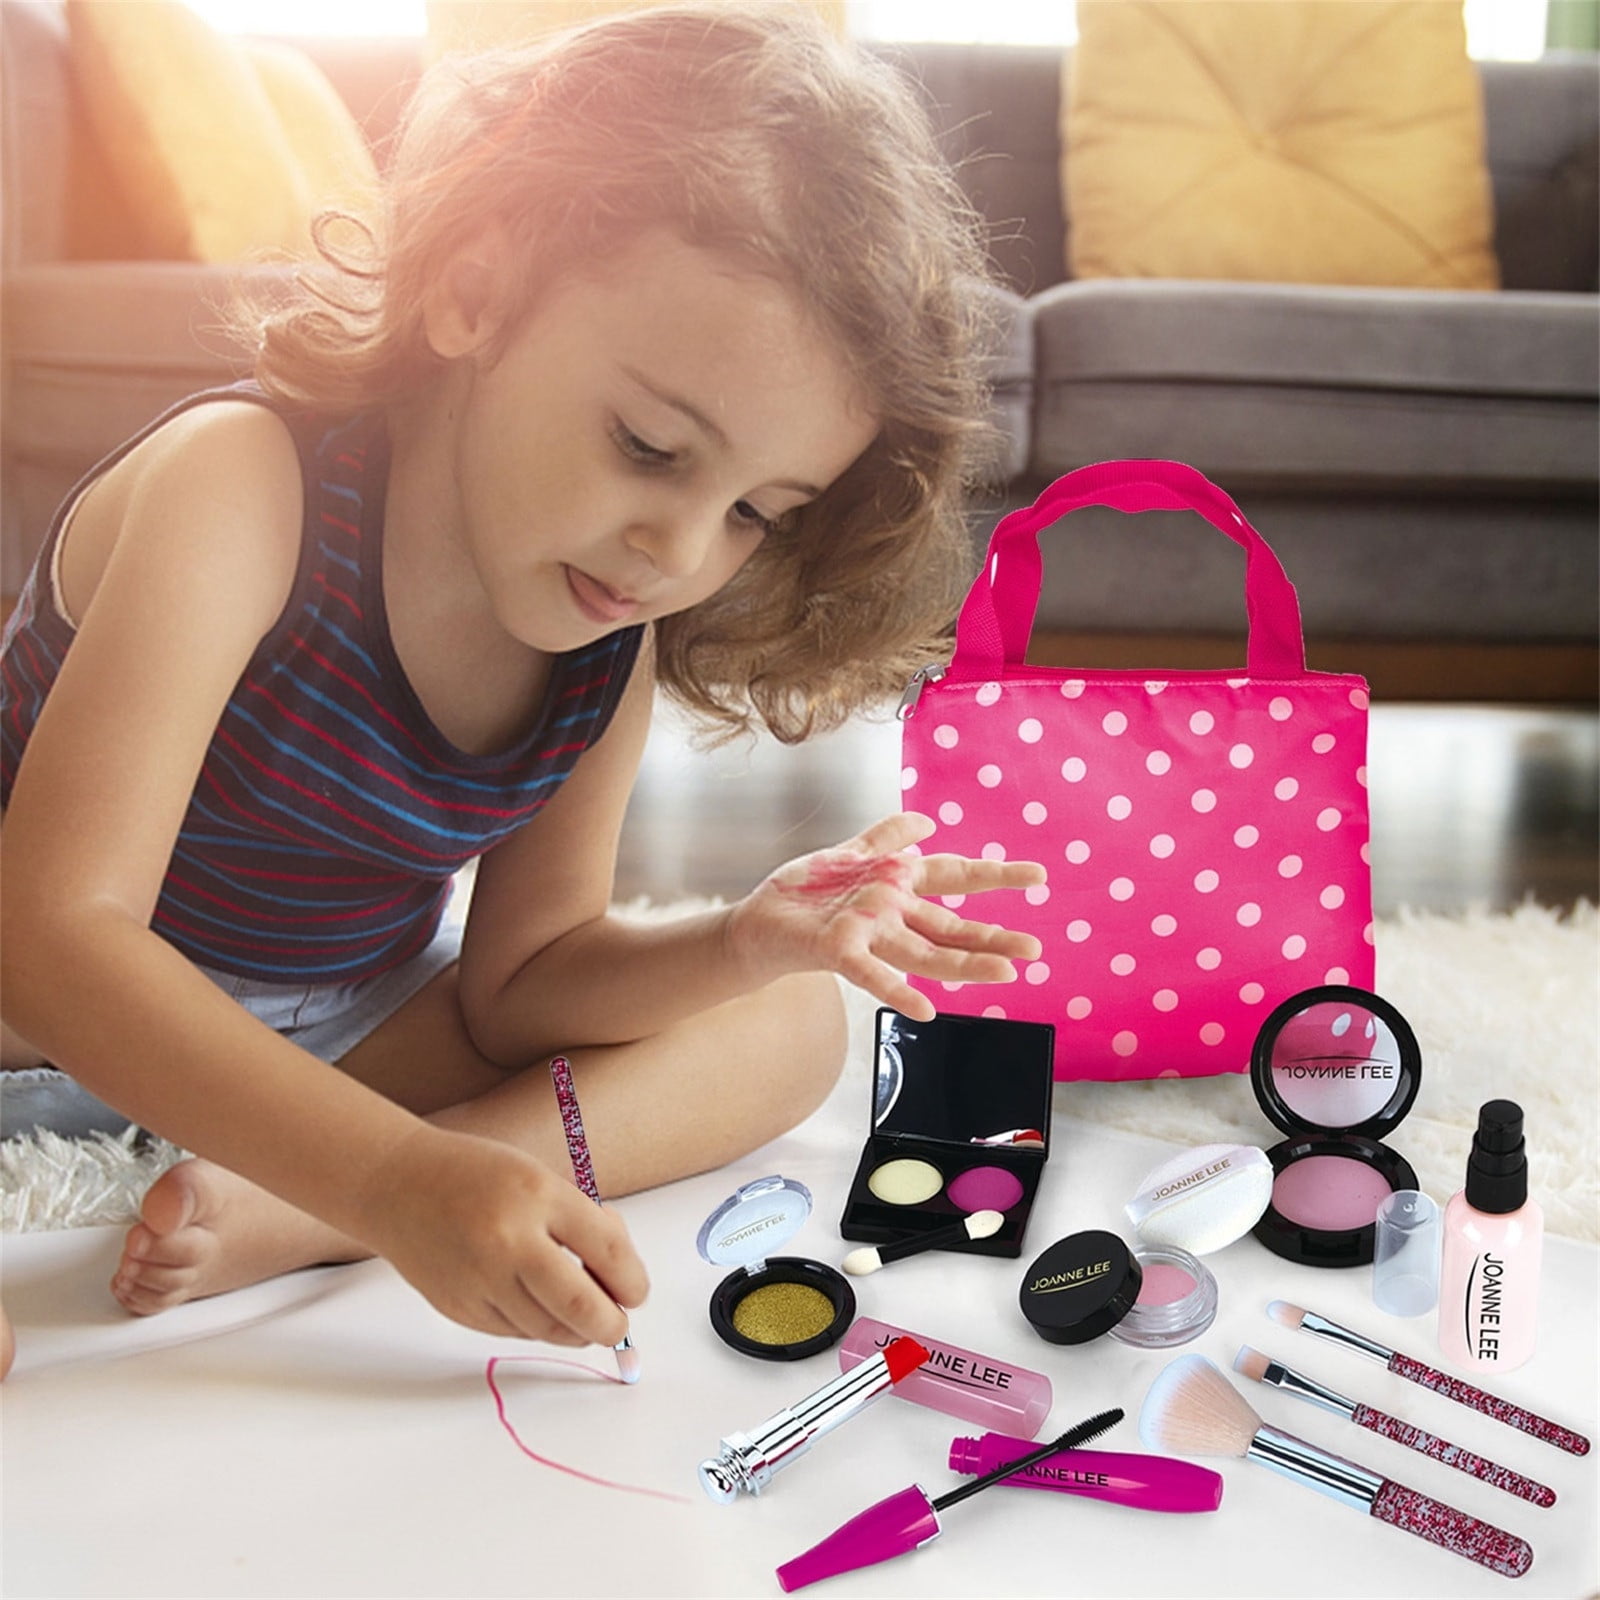 Washable Makeup Toy Set for Girls , Princess Play Makeup Set for 5 6 7 8 9 10 Years Old, Beauty Gift Set for Birthday Christmas with Reusable Cosmetic